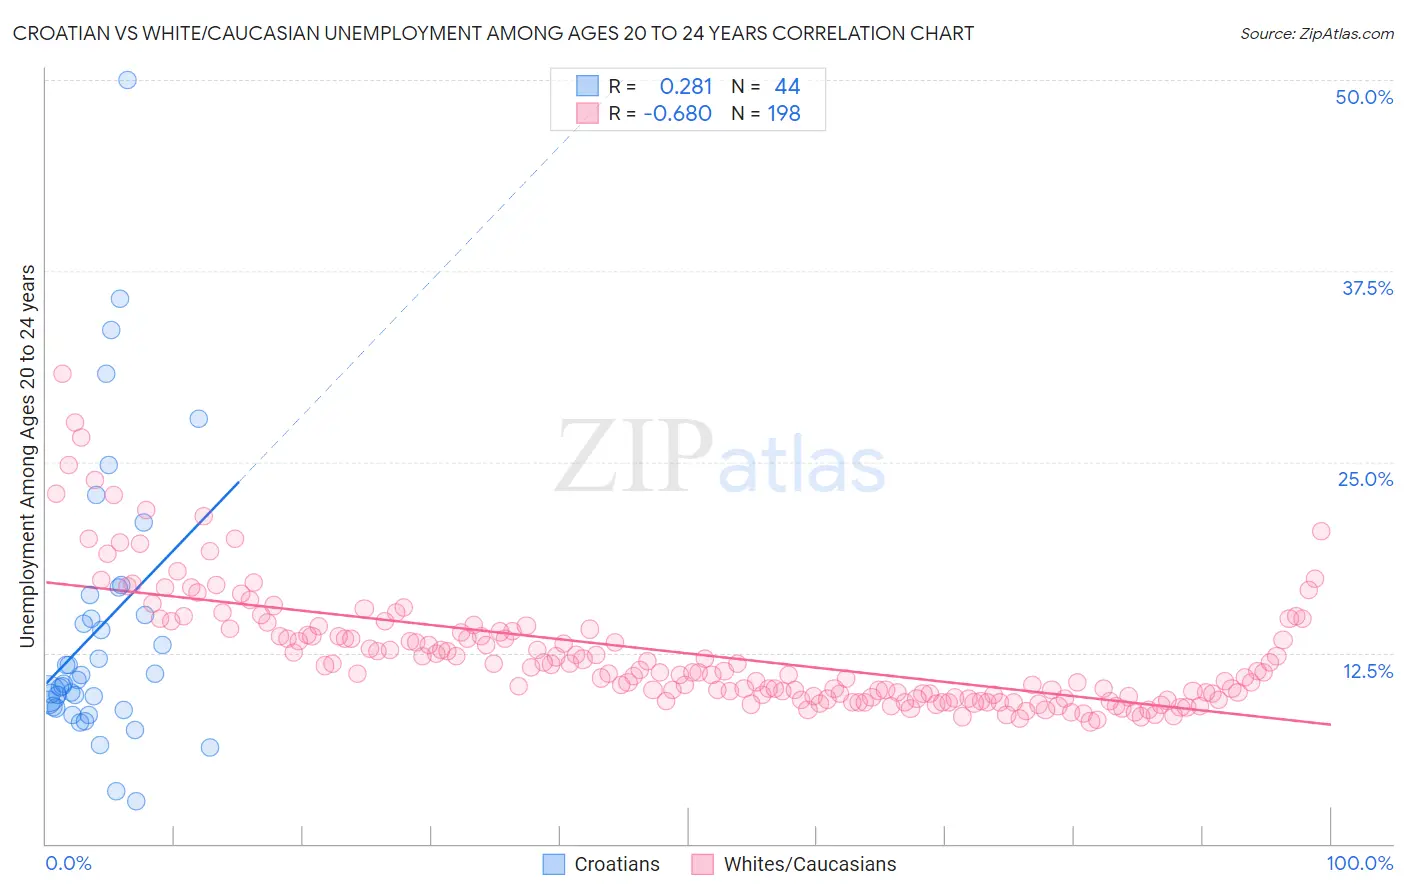 Croatian vs White/Caucasian Unemployment Among Ages 20 to 24 years